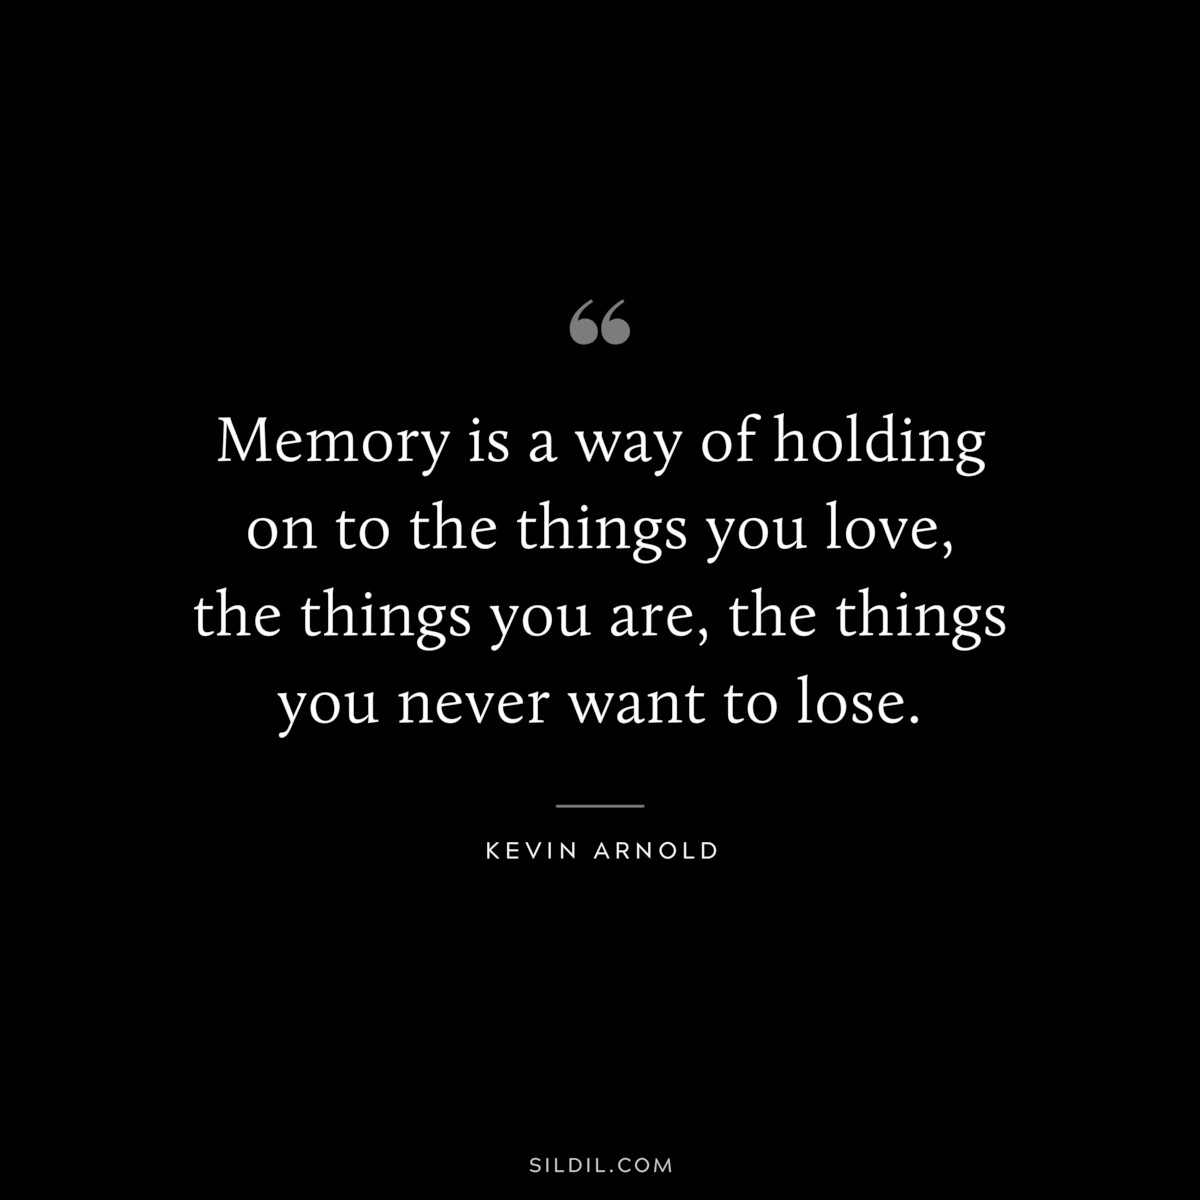 Memory is a way of holding on to the things you love, the things you are, the things you never want to lose. ― Kevin Arnold